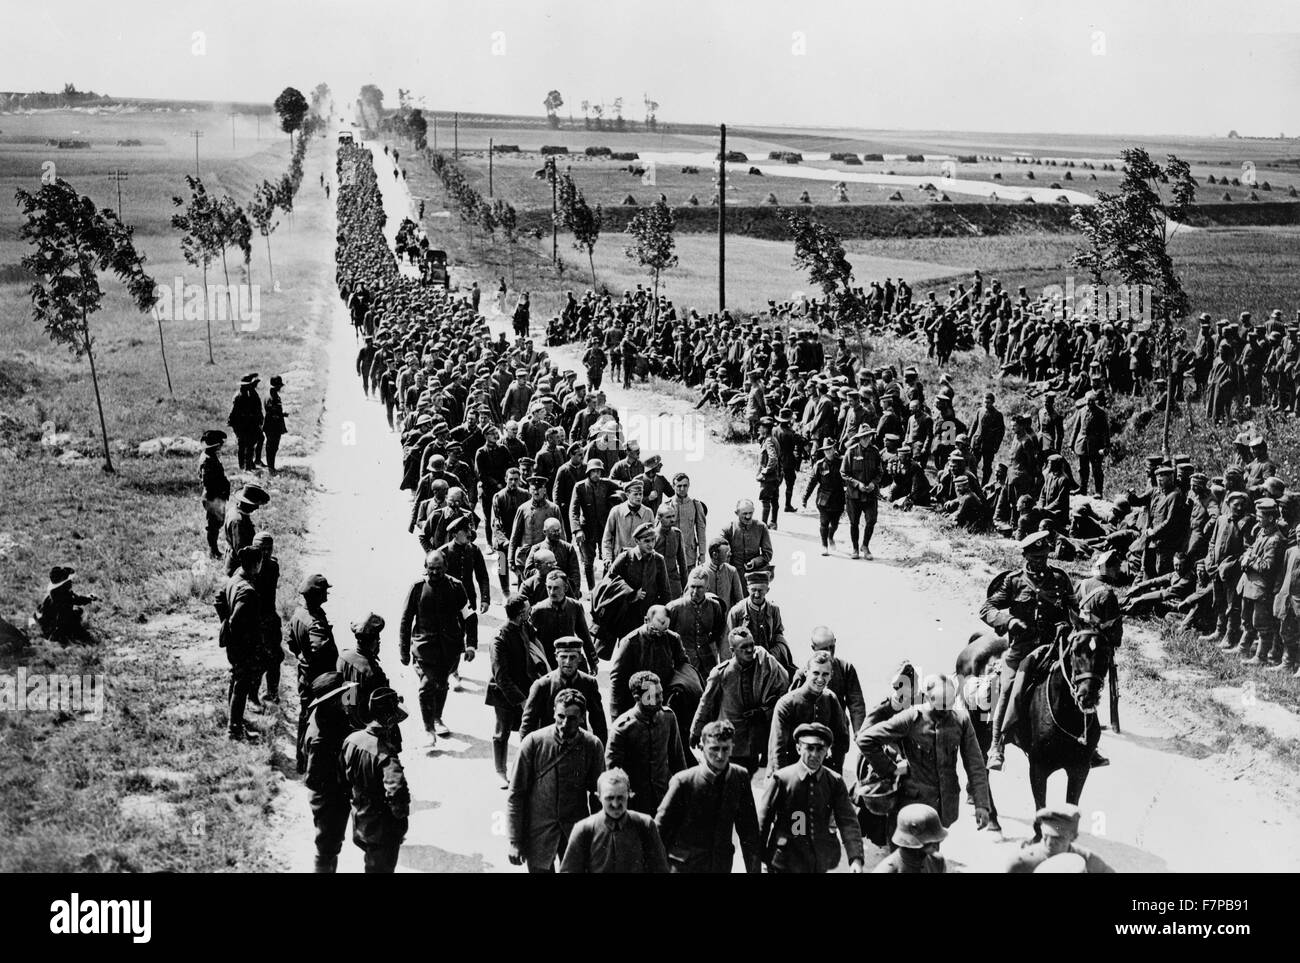 Official photographic print taken on the British Western Front in France. German prisoners in batches of 1,000 arriving at a prisoners of war cage. Photograph of a long line of German soldiers, prisoners of war, walking along roadway, somewhere in France. Stock Photo